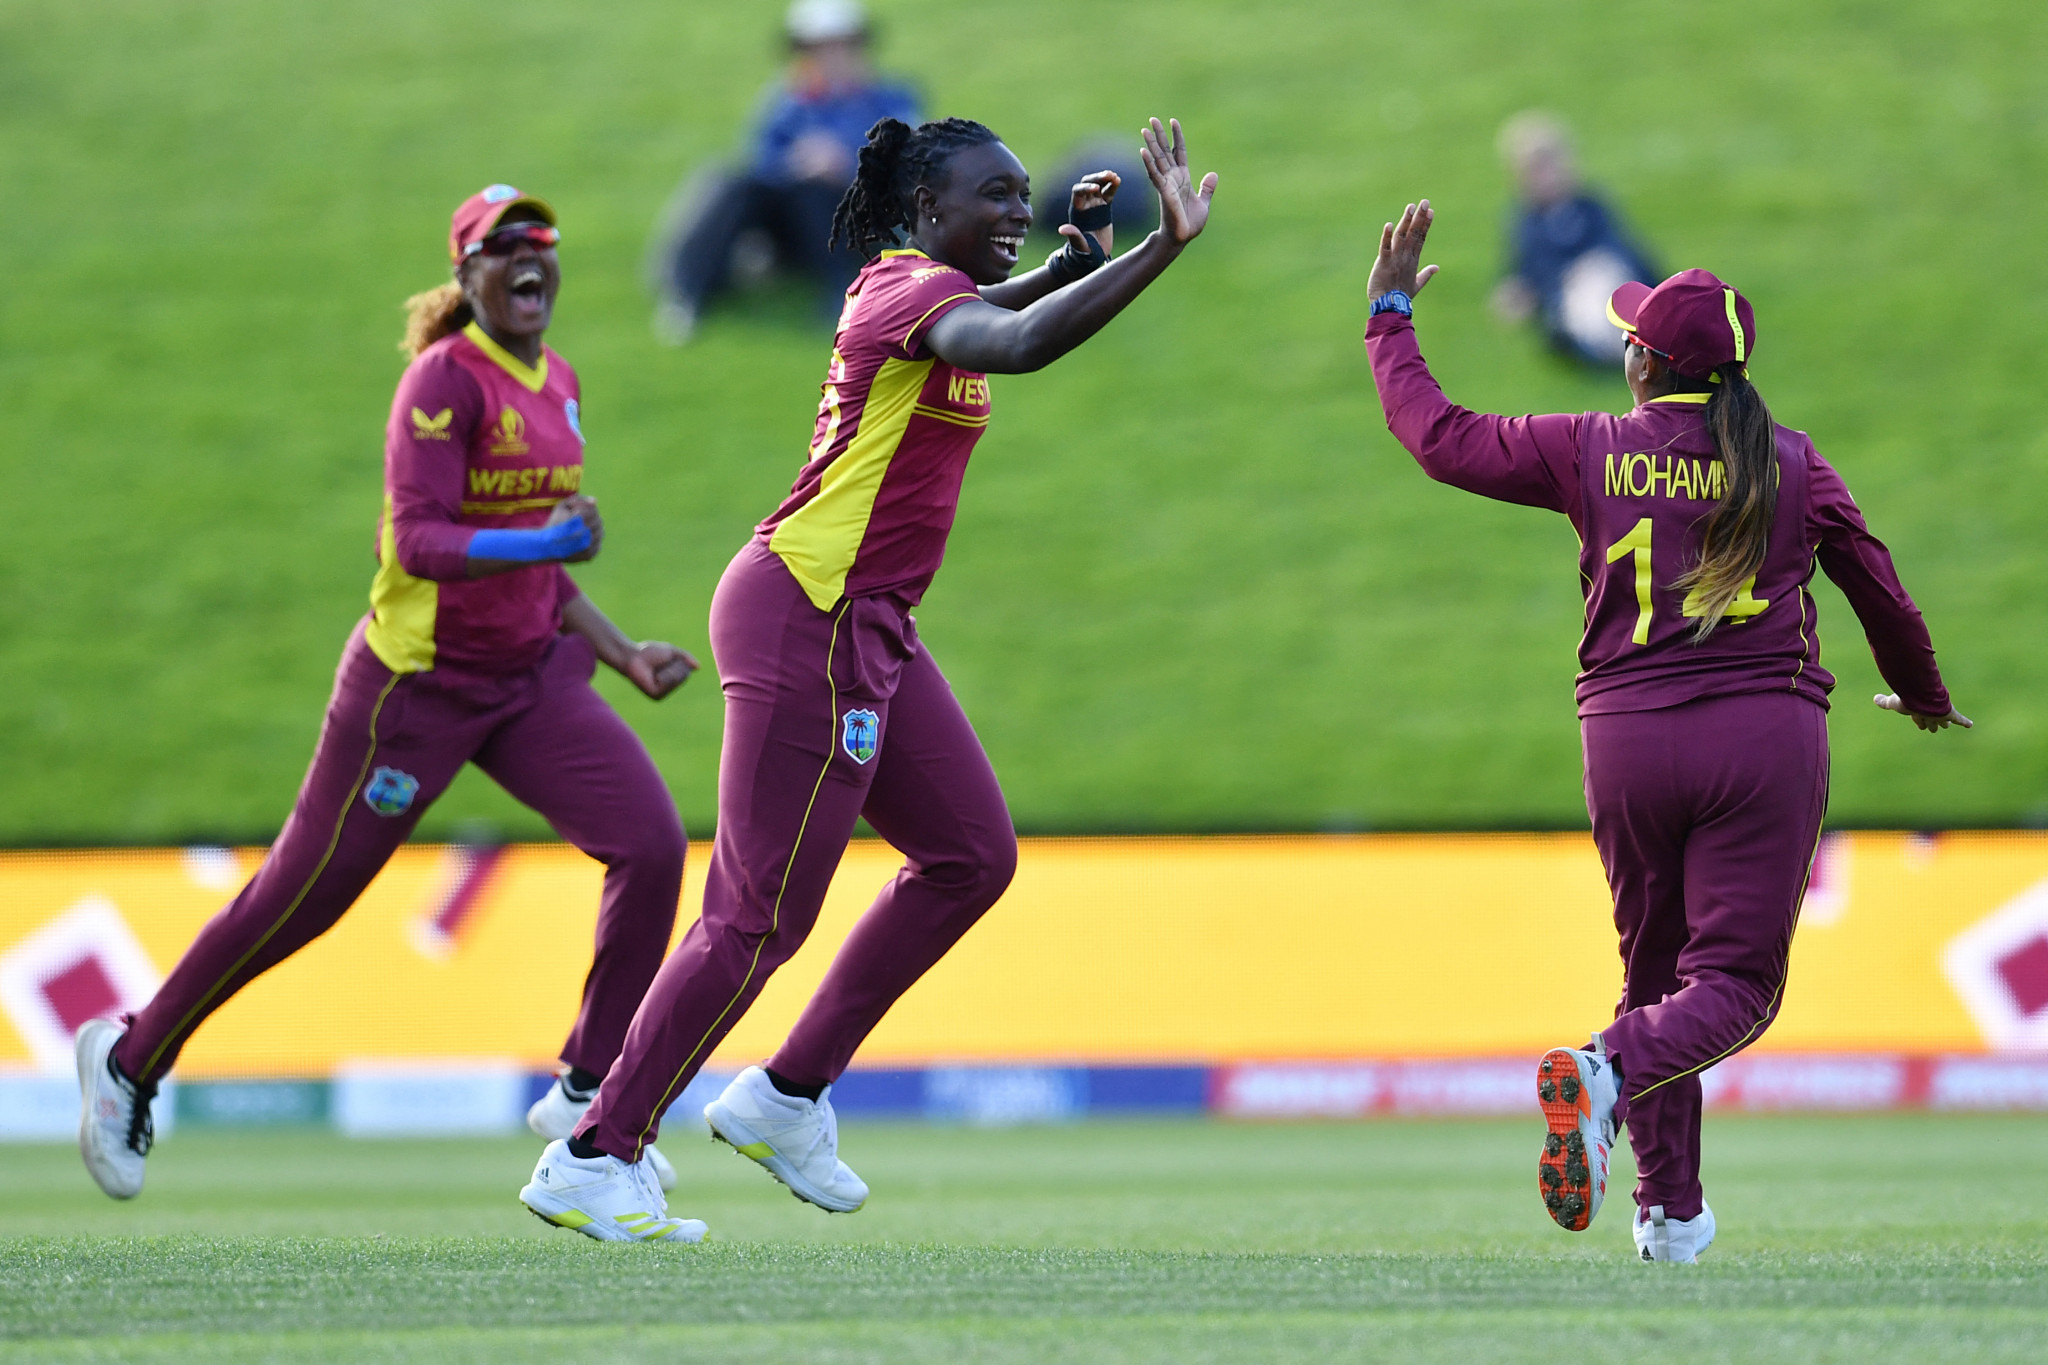 The West Indies pulled off a shock victory over defending champions England in the Women's Cricket World Cup in Dunedin ©Getty Images